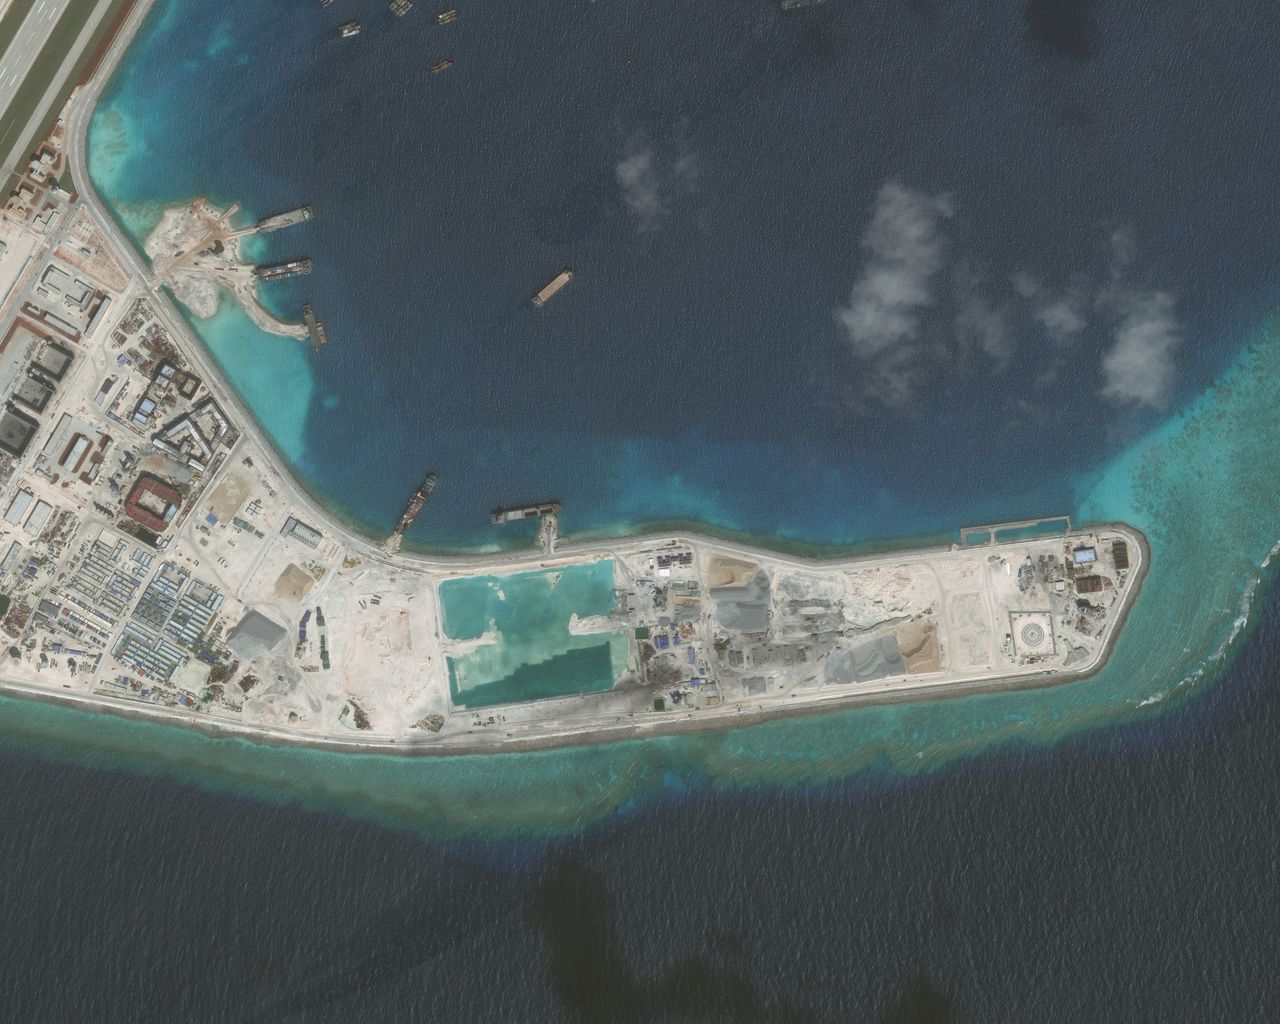 The Chinese foreign minister said progress had been made on the South China Sea dispute.